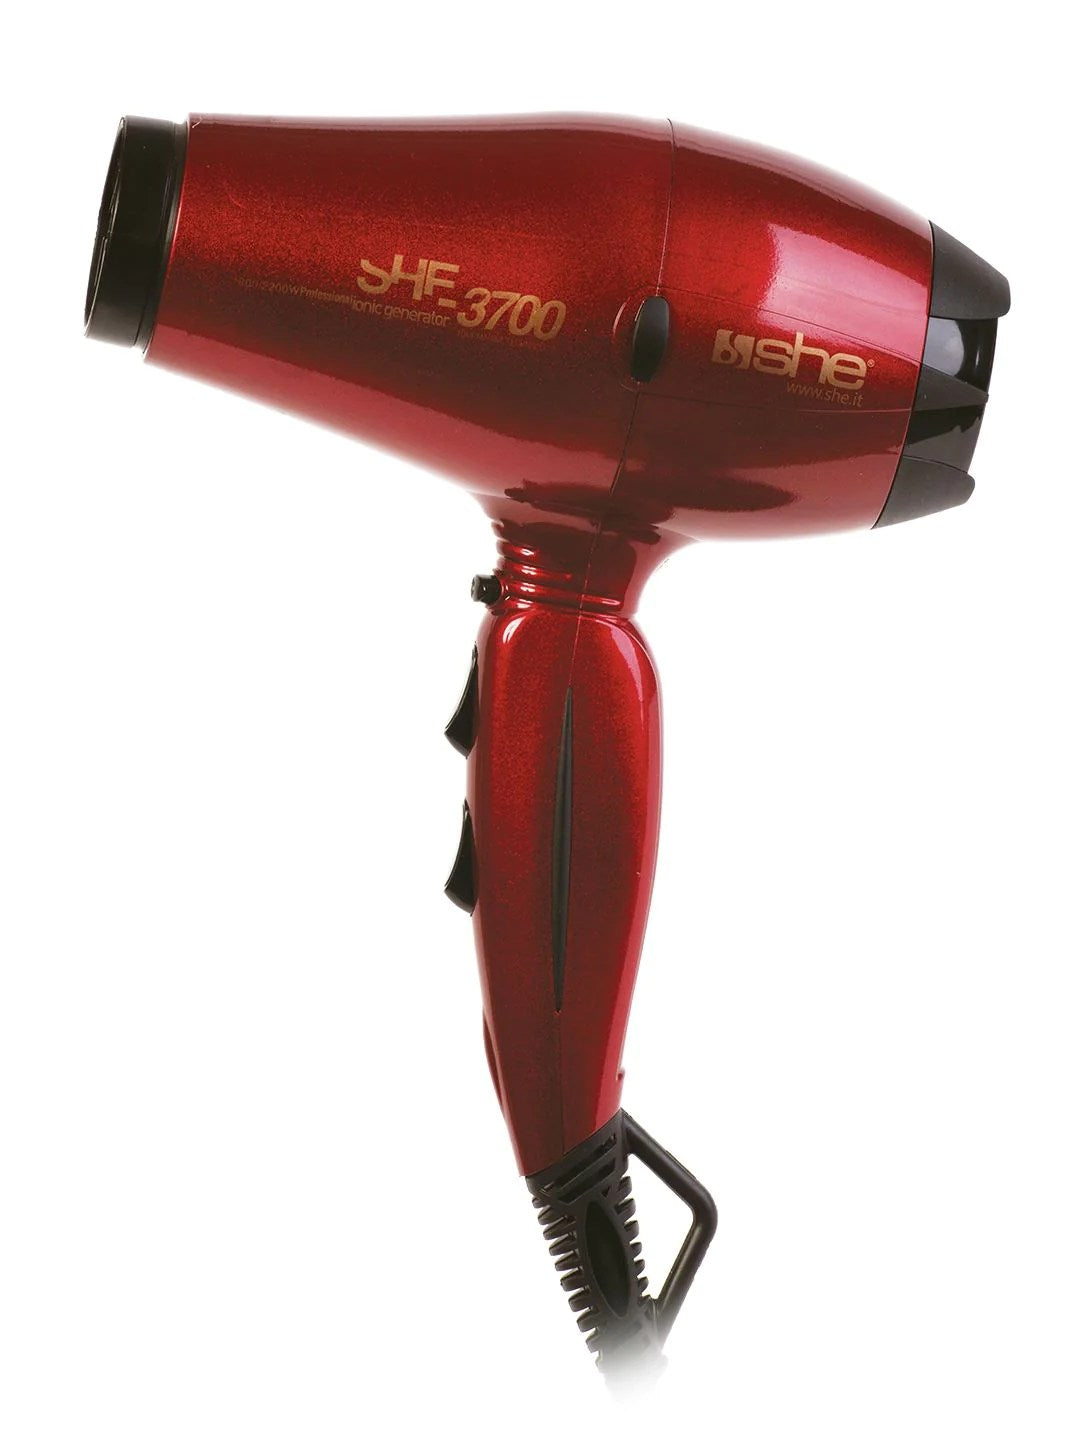 

She is a professional compact hair dryer with 3700 Ionic technology, 2200 W power, and red color.